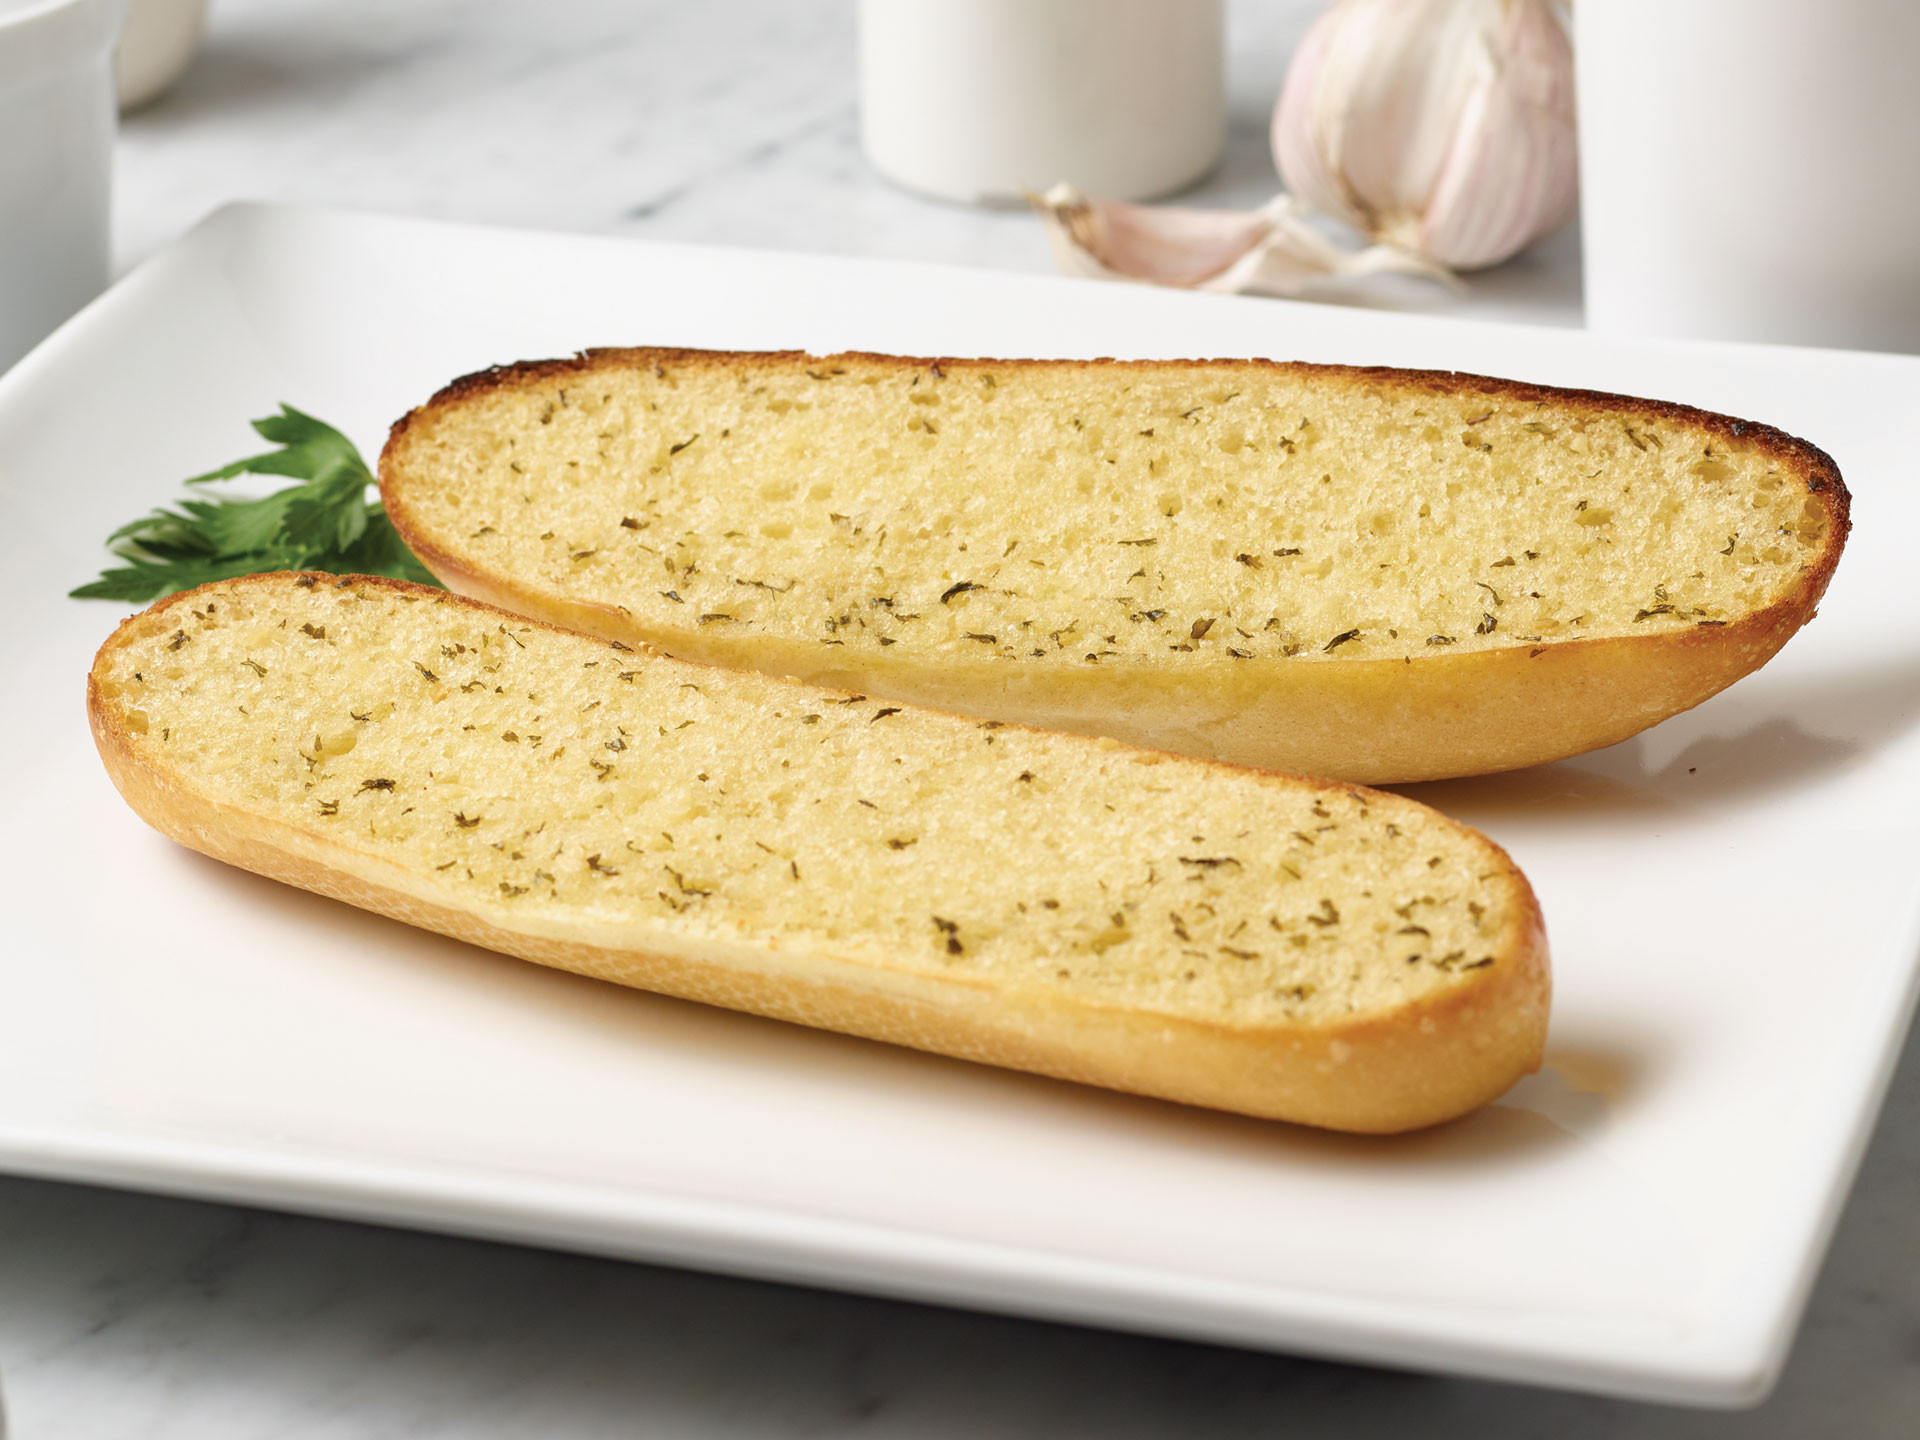 Calories In Garlic Bread
 calories in garlic bread with cheese